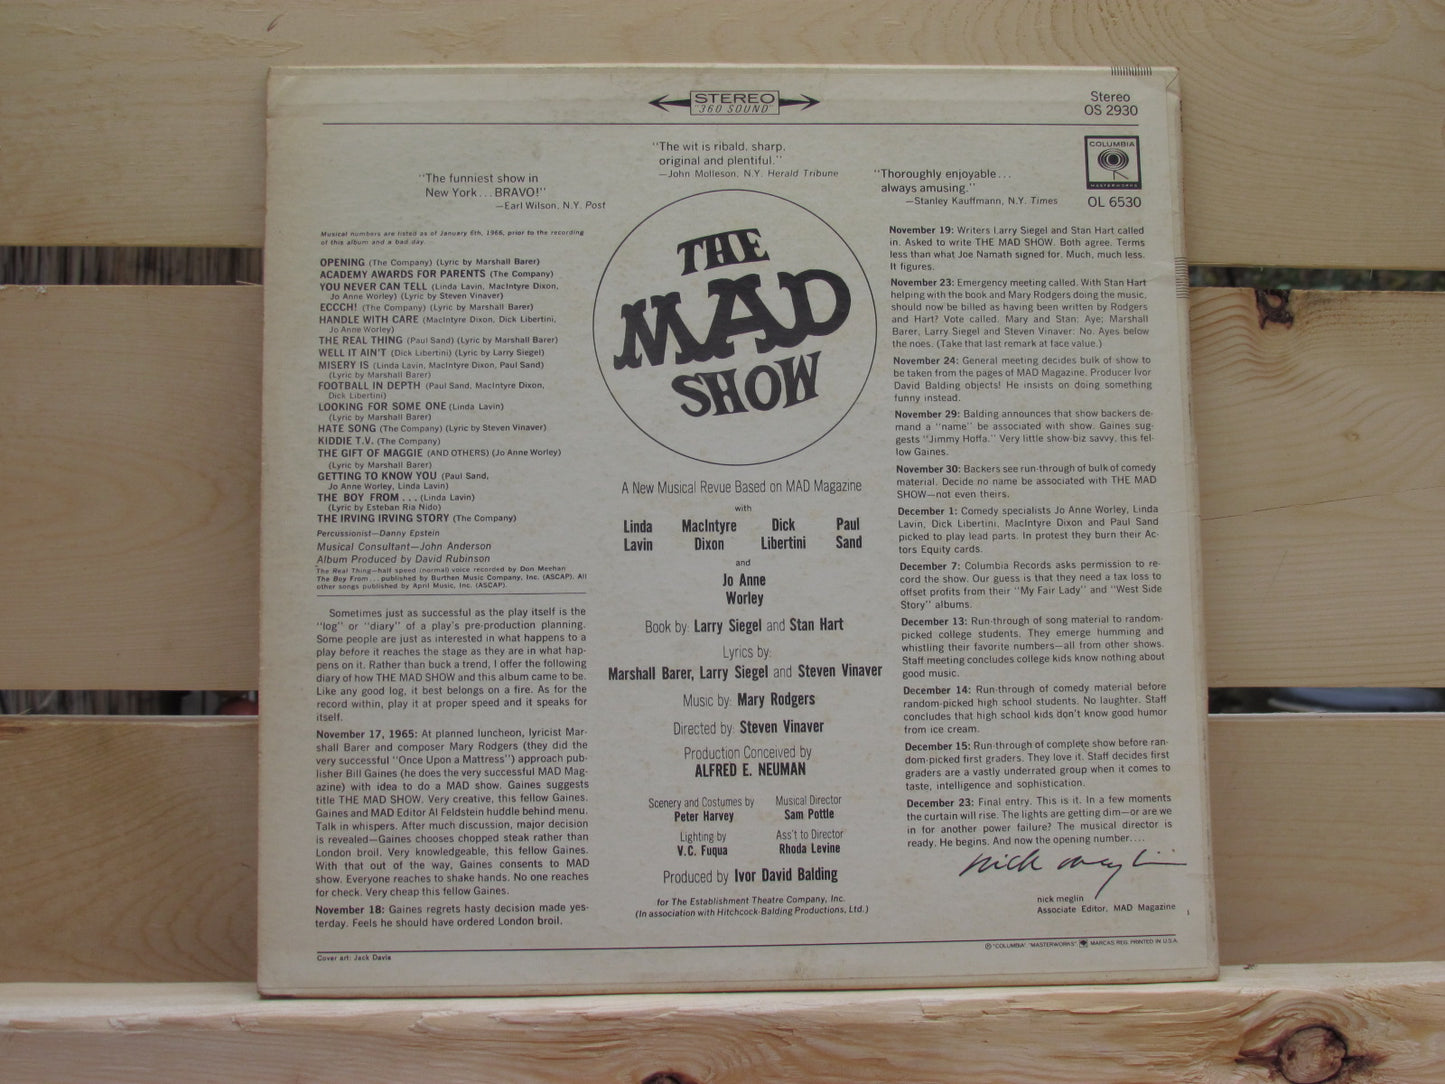 The Mad Show Vinyl Record